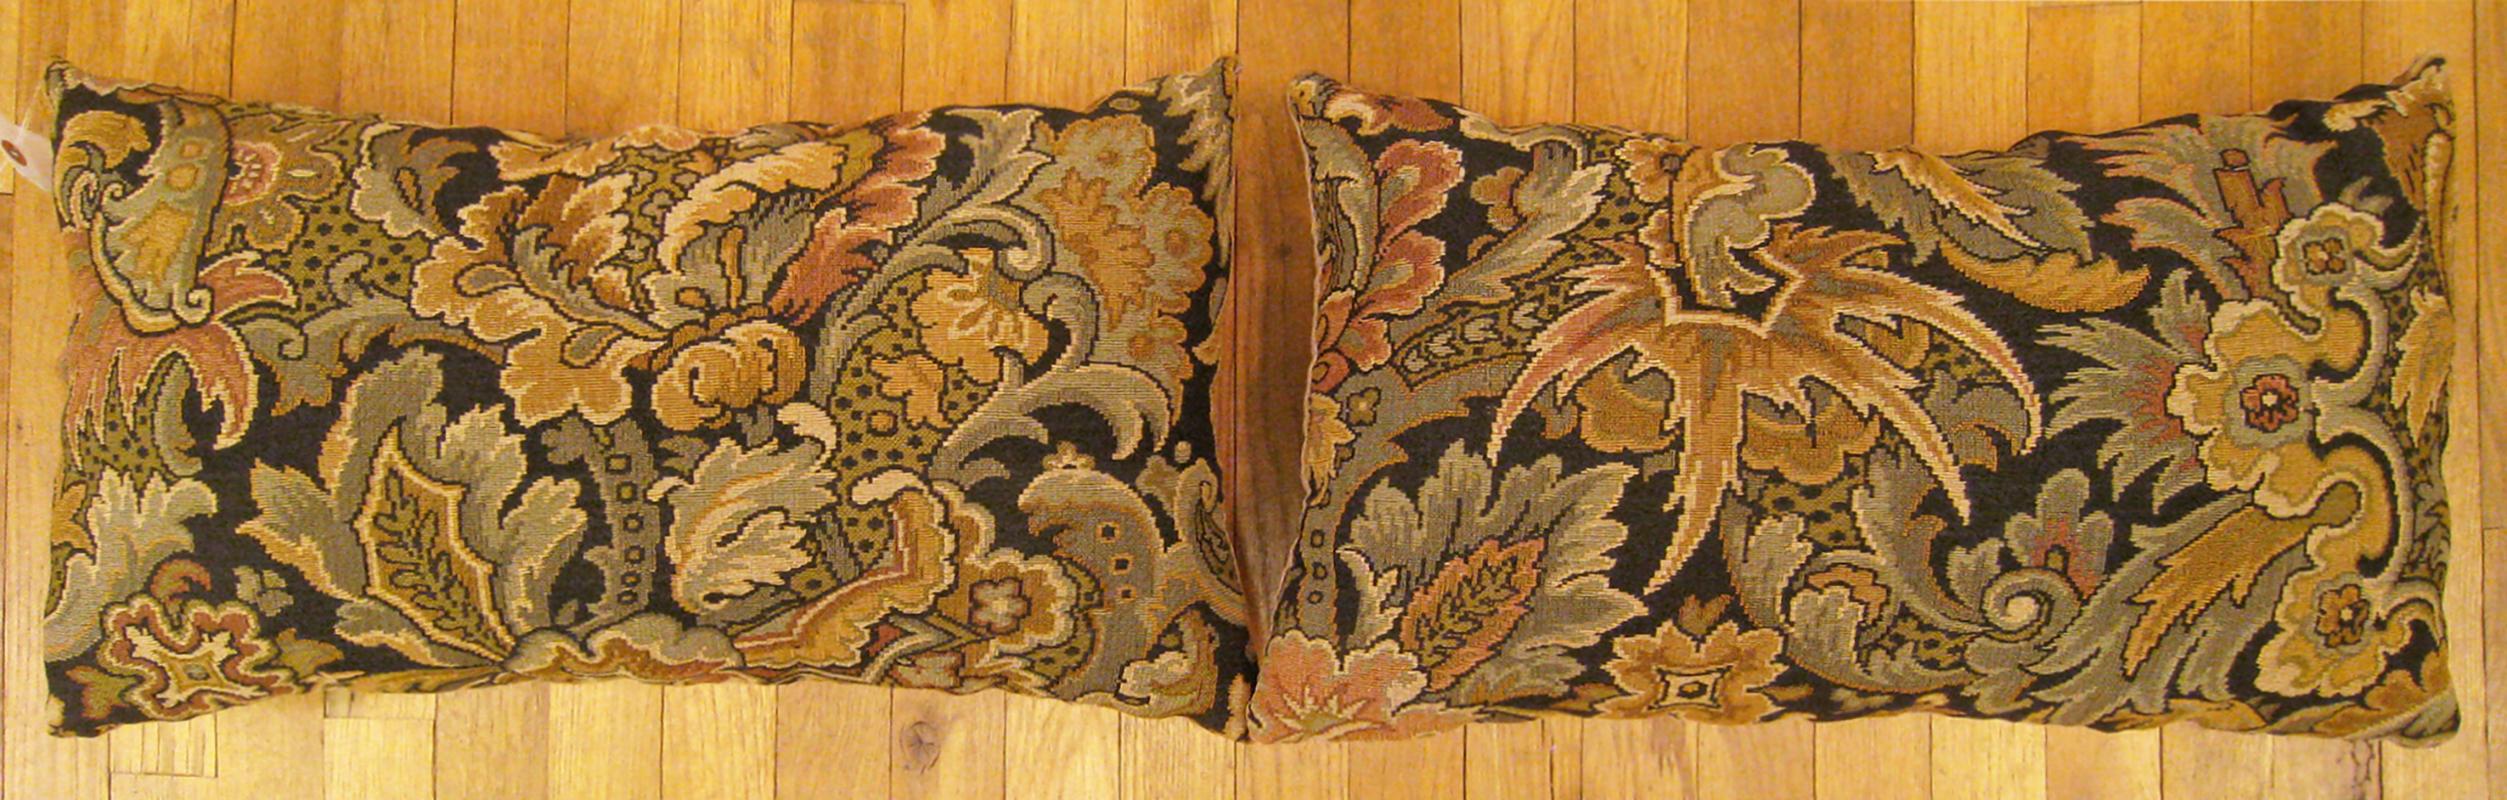 A pair of antique jacquard tapestry pillows ; size 1'2” x 2'0” each.

An antique decorative pillows with floral elements allover a gold green central field, size 1'2